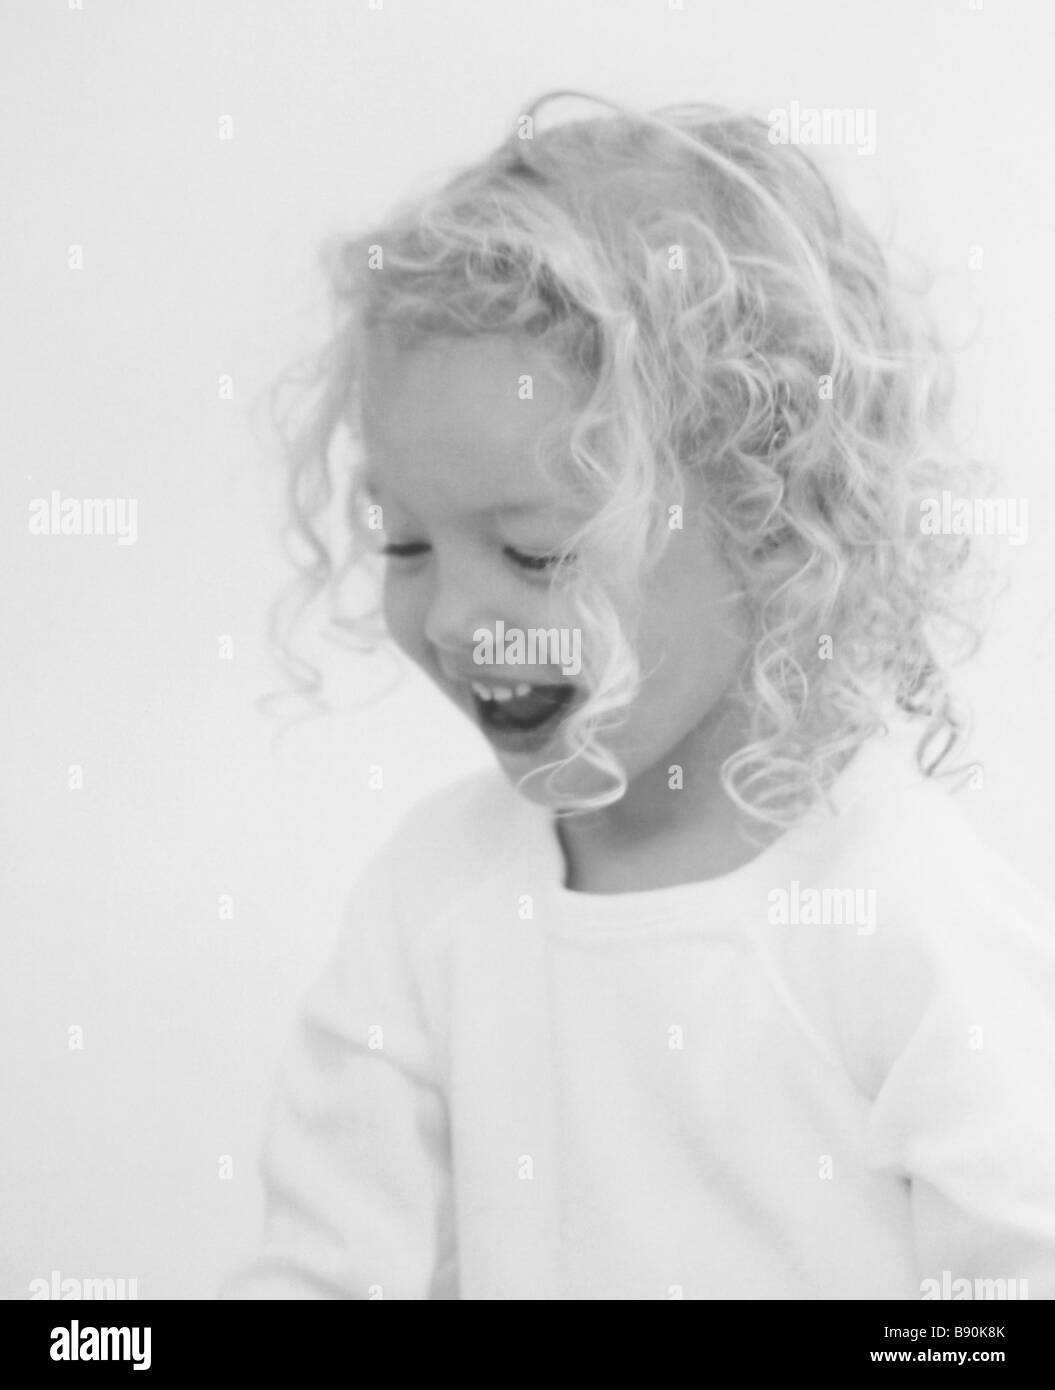 FL6079, Silver Parrot Studio; Young Girl Curly Blonde Hair Laughing Stock Photo